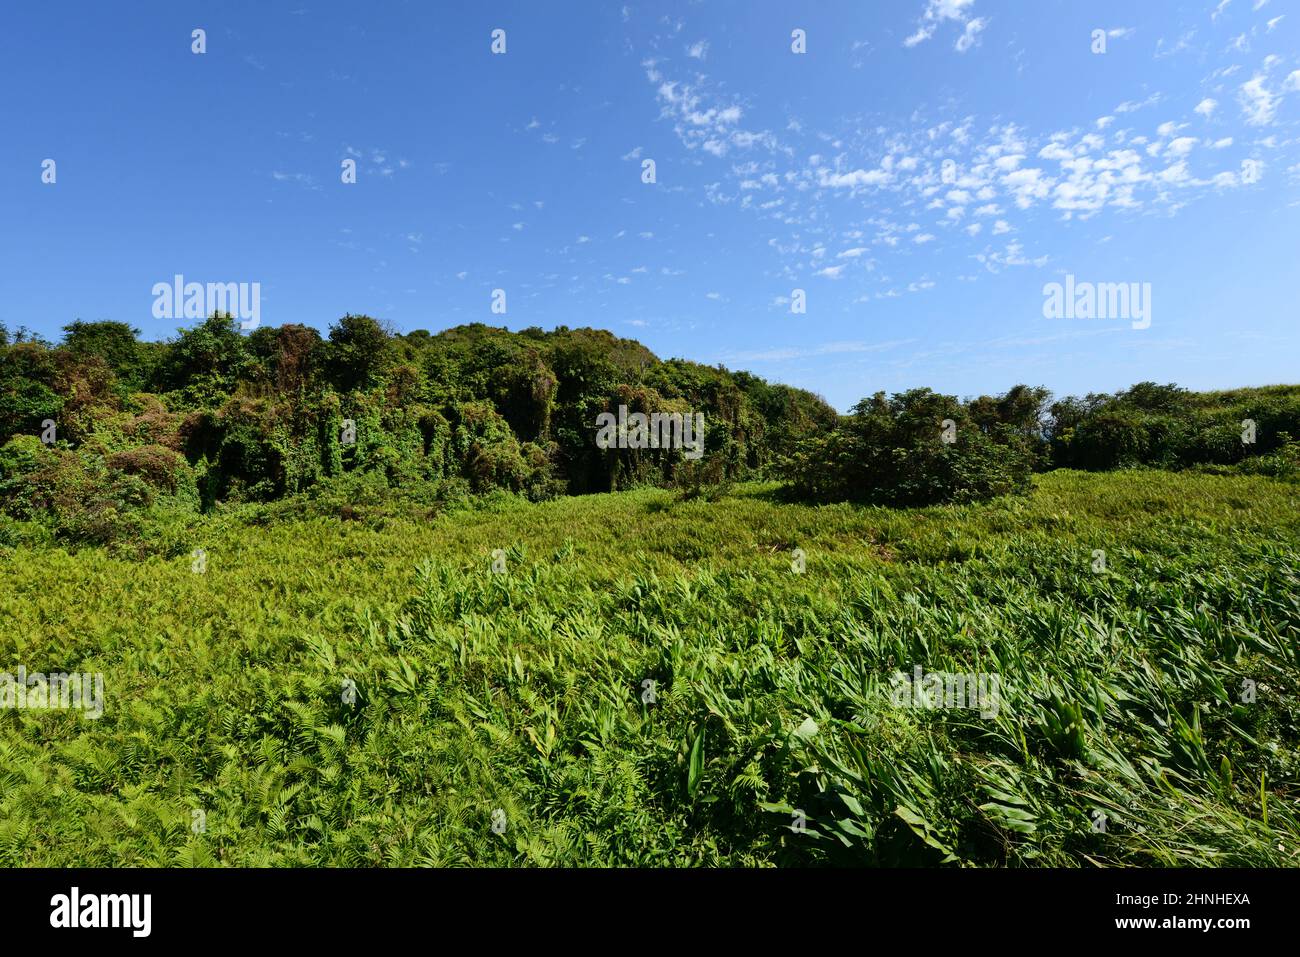 A Mikania field in southern Lamma island in Hong Kong. Stock Photo